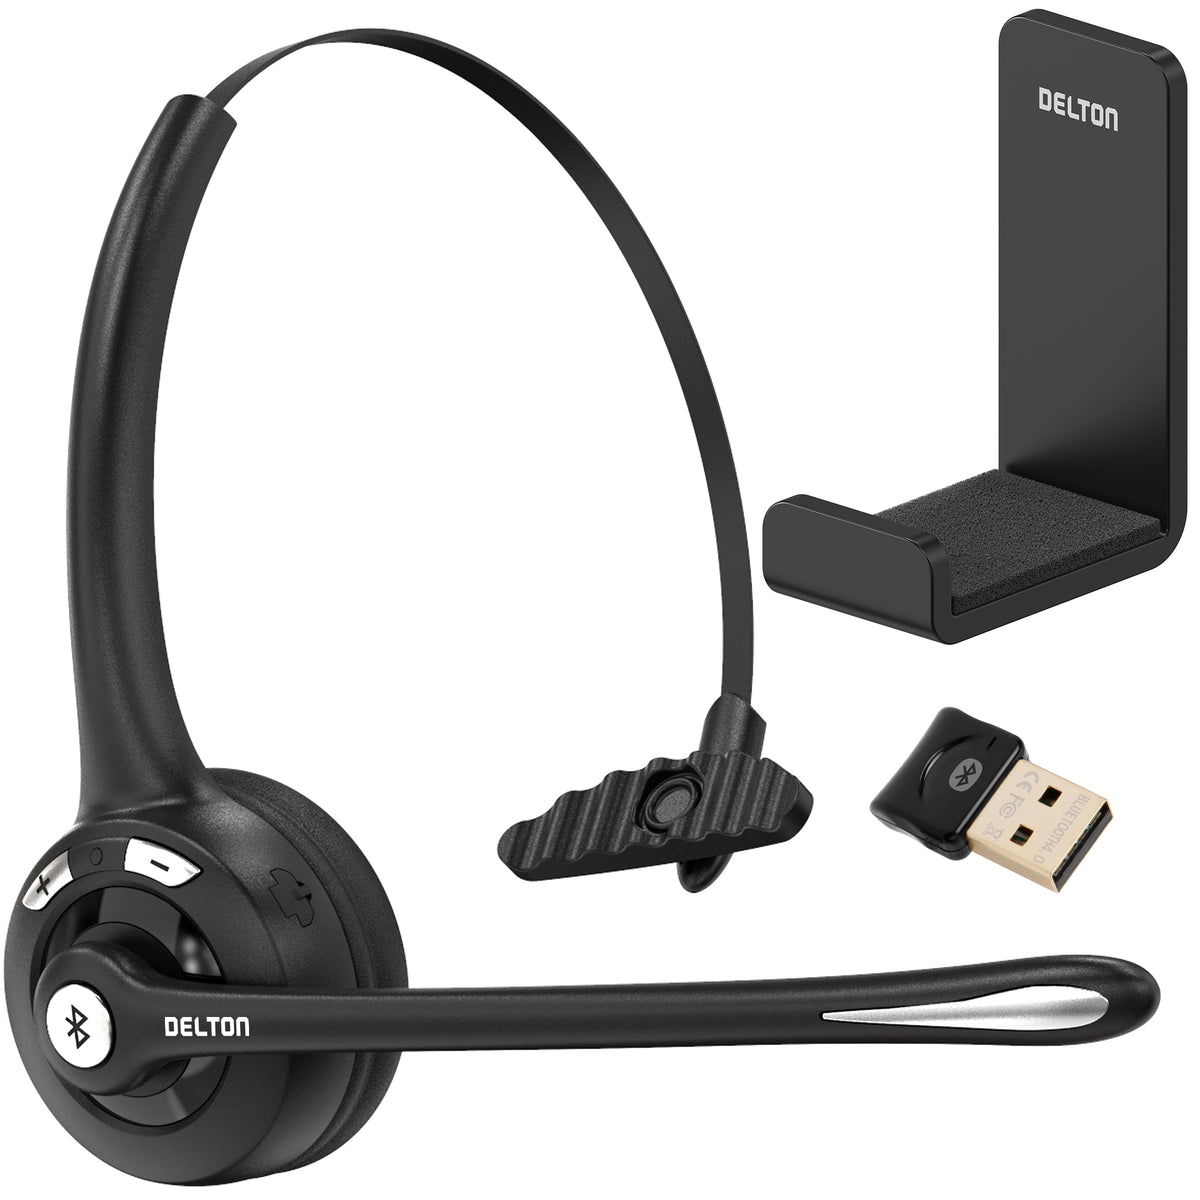 Delton 10X Trucker/Office Bluetooth Headset with Mic + USB Dongle + Hook